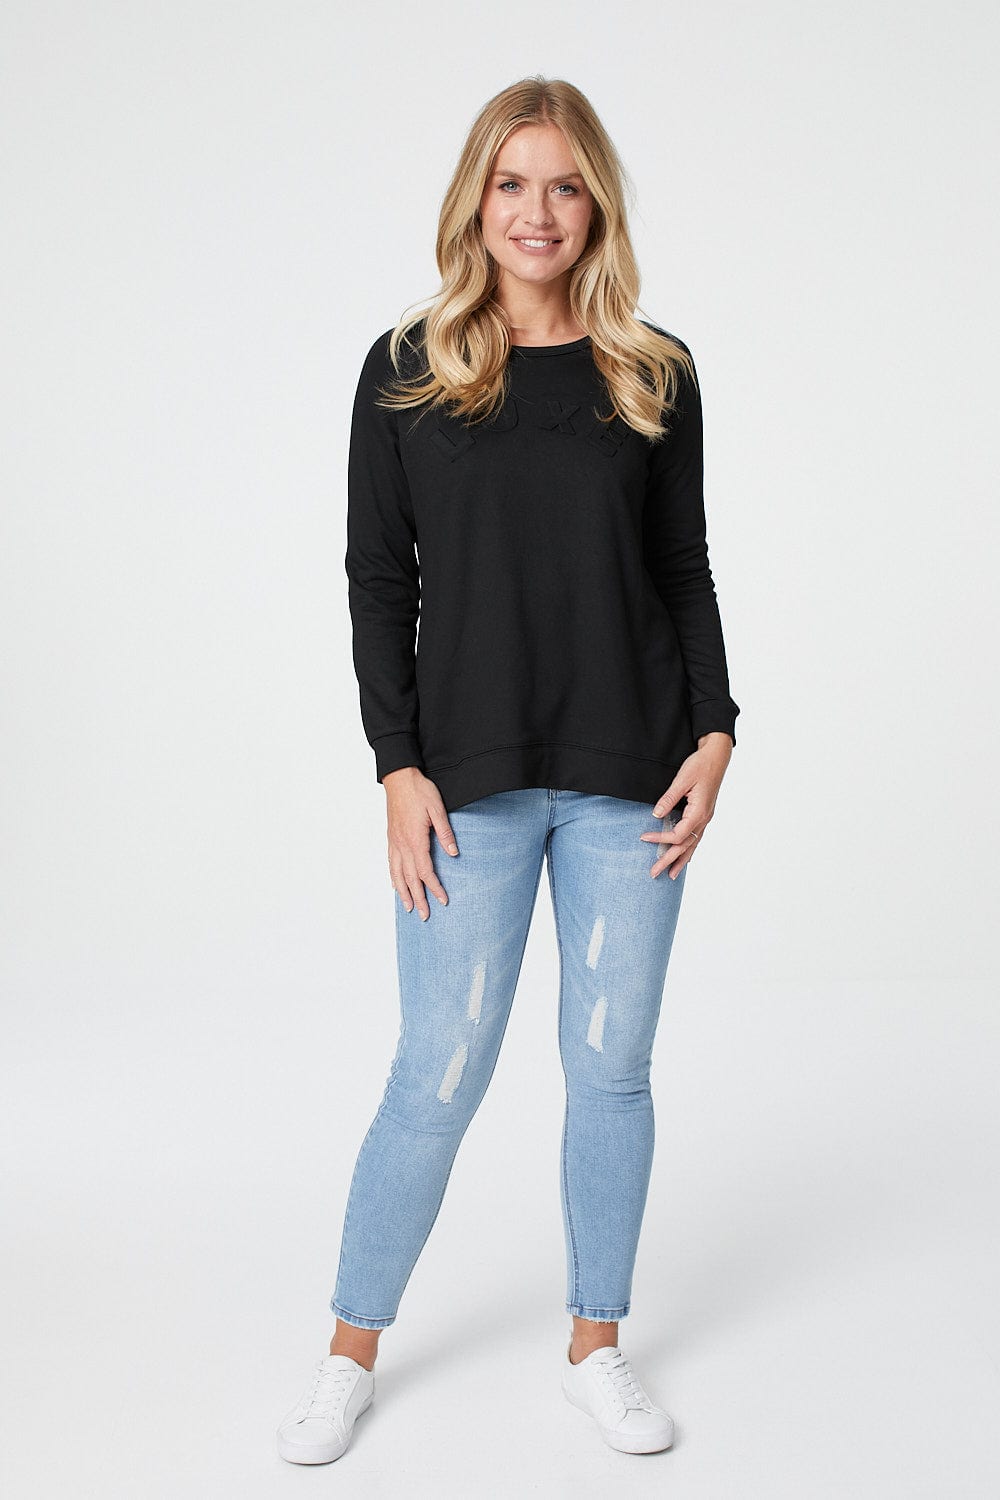 Luxe Printed Relaxed Jumper | Izabel London